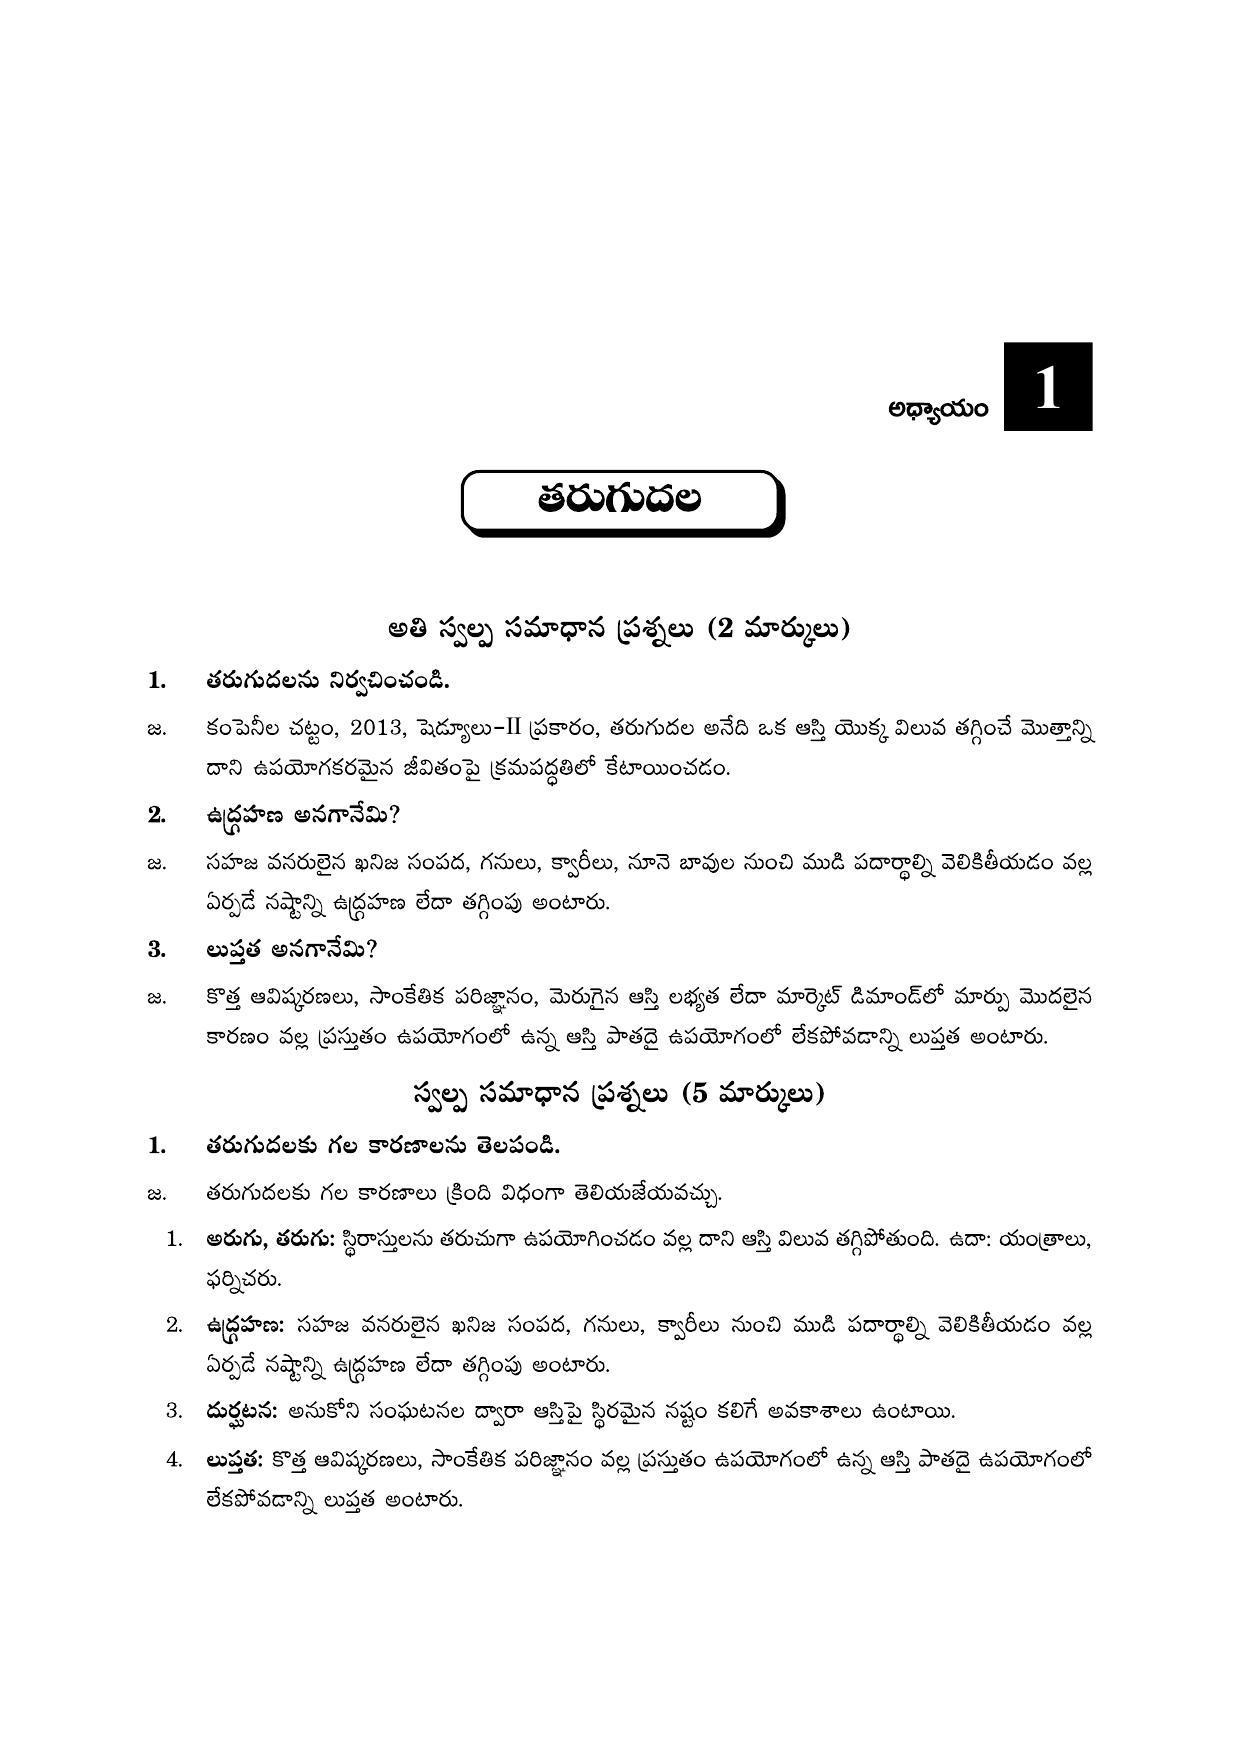 TS SCERT Inter 2nd Year Commerce &Accts II yr TM Path 1 (Telugu Medium) Text Book - Page 28